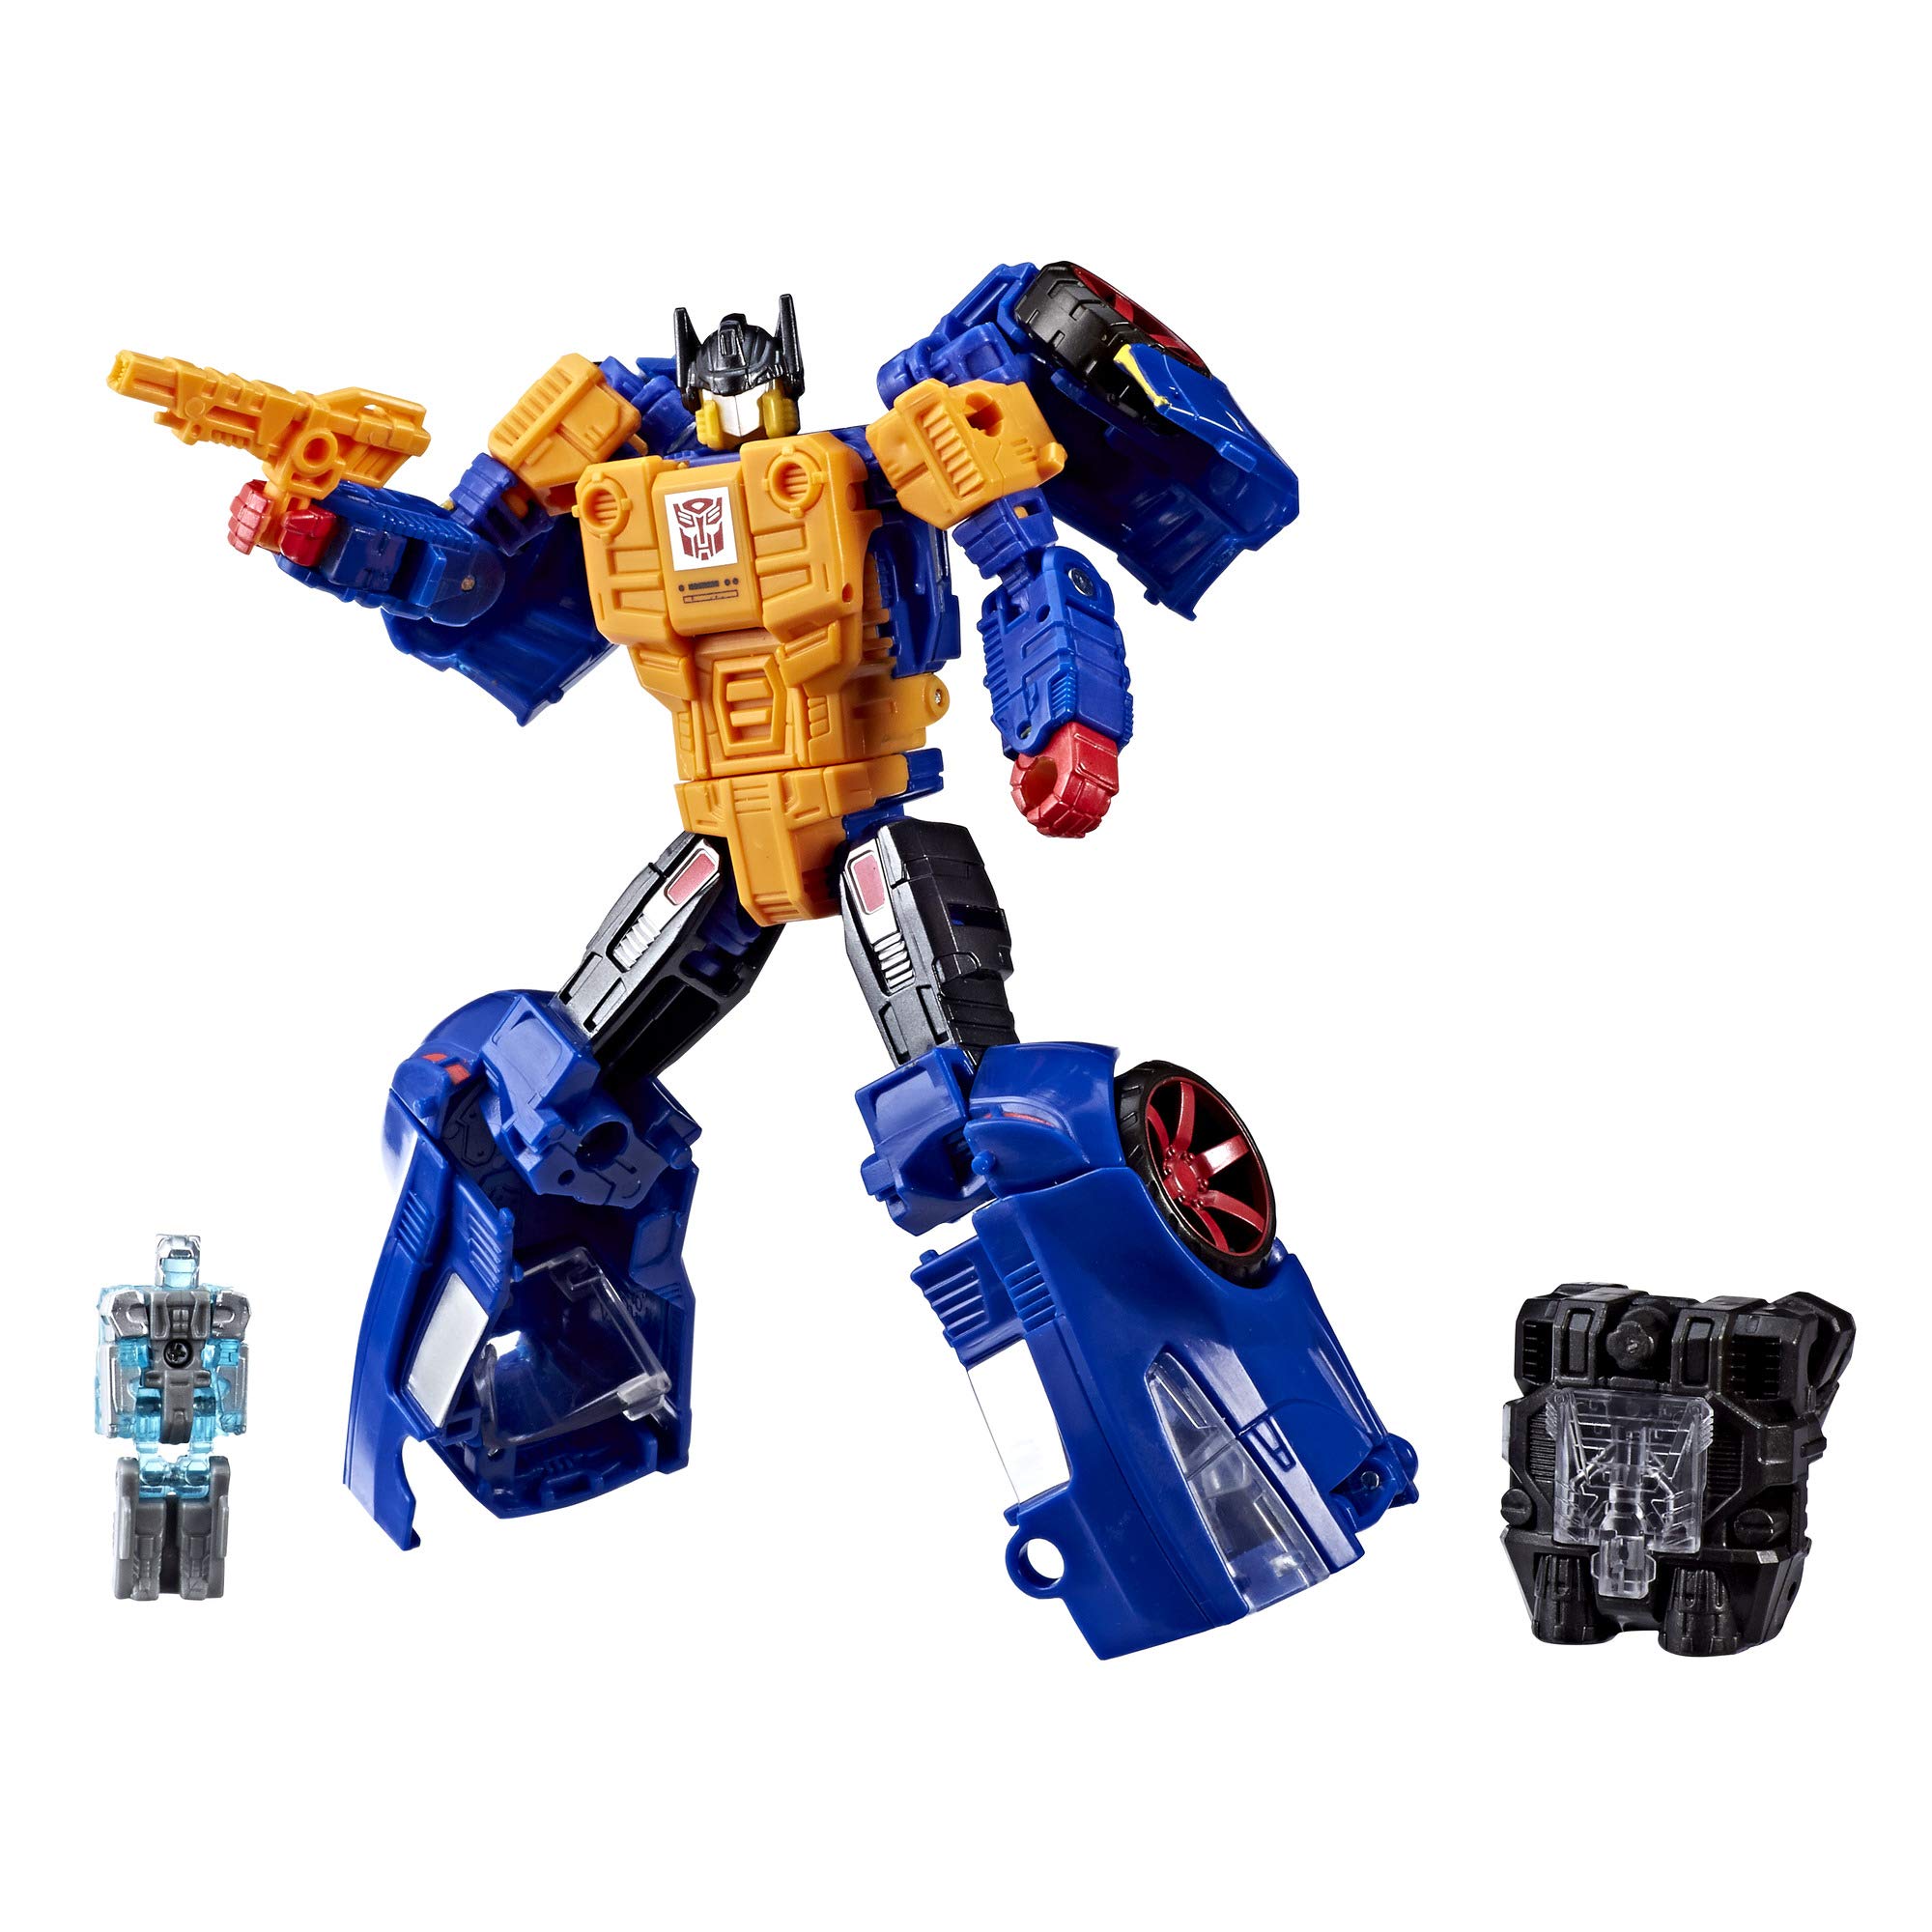 Transformers Power of the Primes Punch-Counterpunch and Prima Prime(Amazon Exclusive)